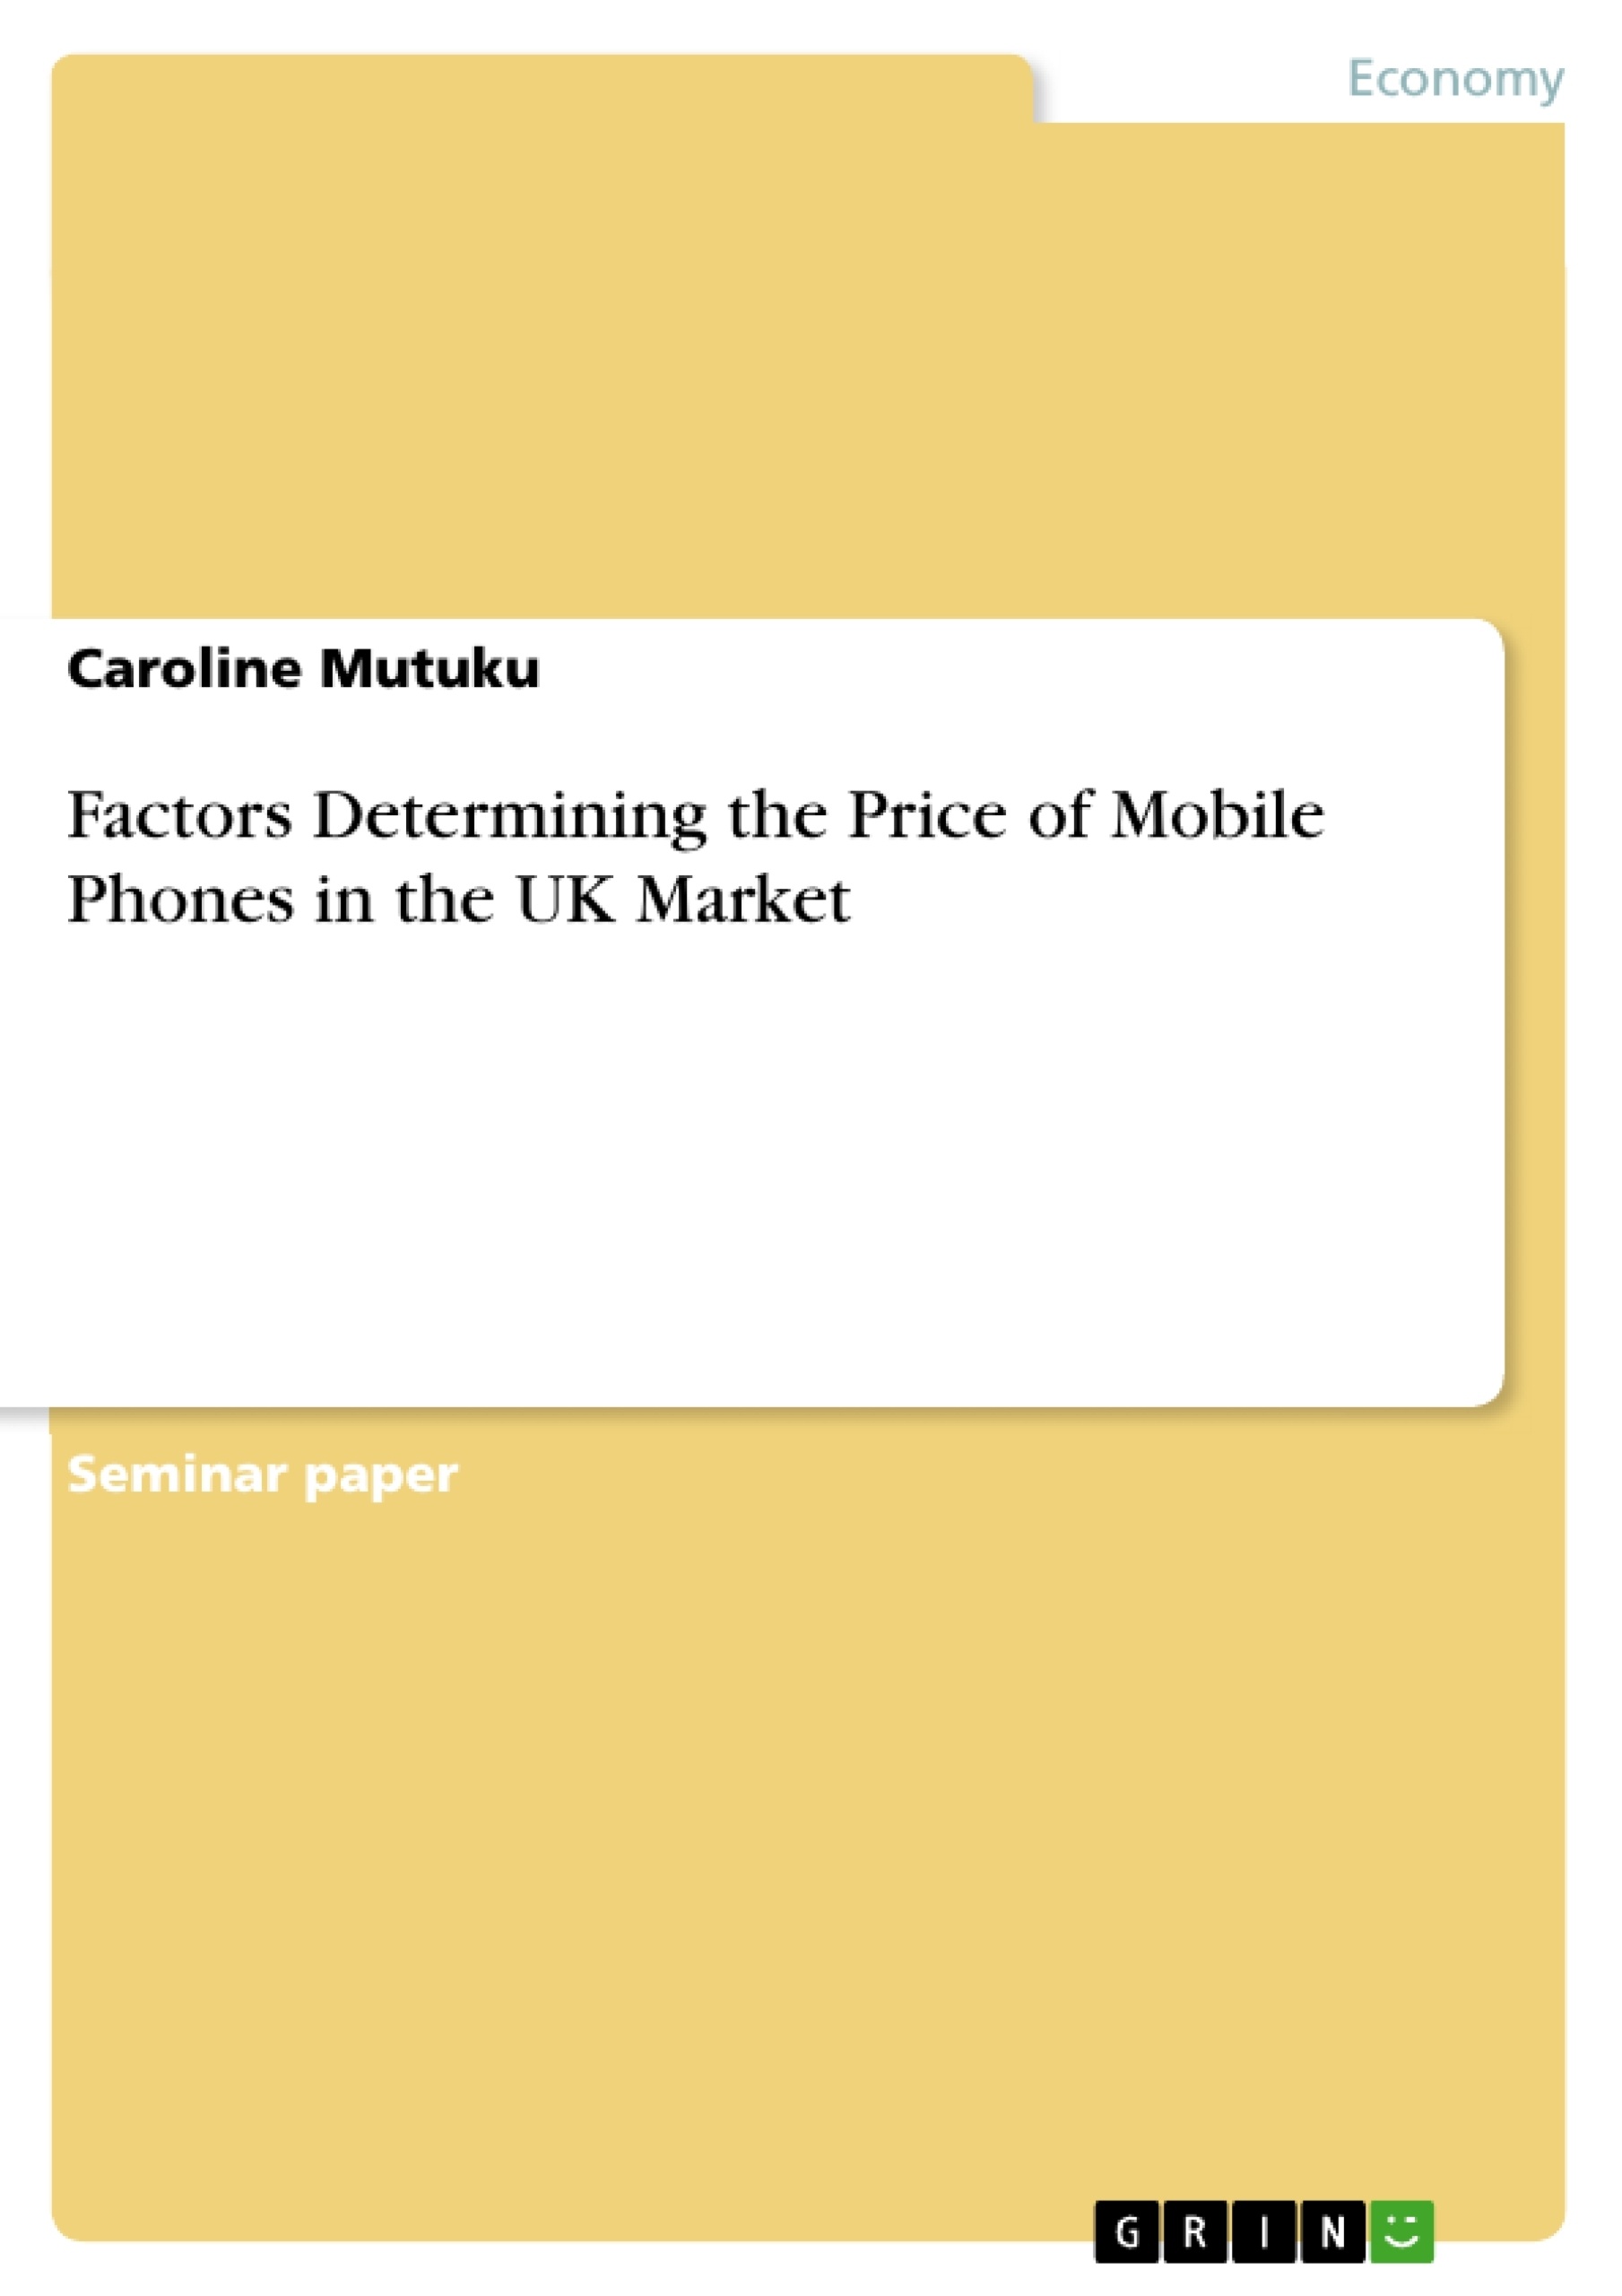 Title: Factors Determining the Price of Mobile Phones in the UK Market